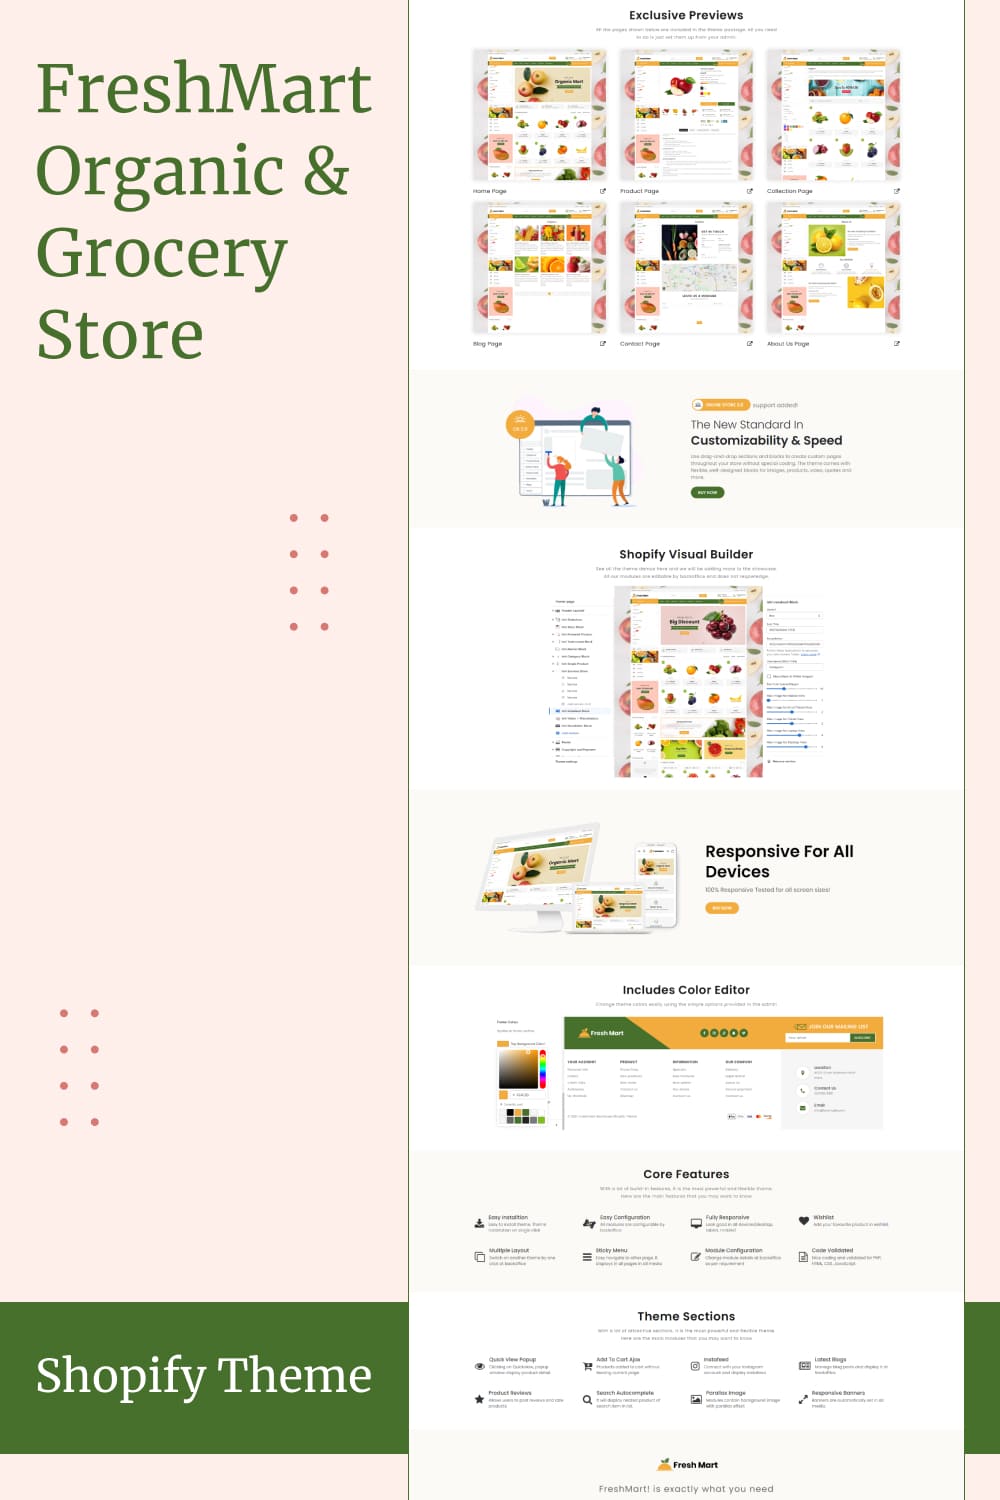 Freshmart organic and grocery store shopify theme, picture for pinterest 1000x1500.